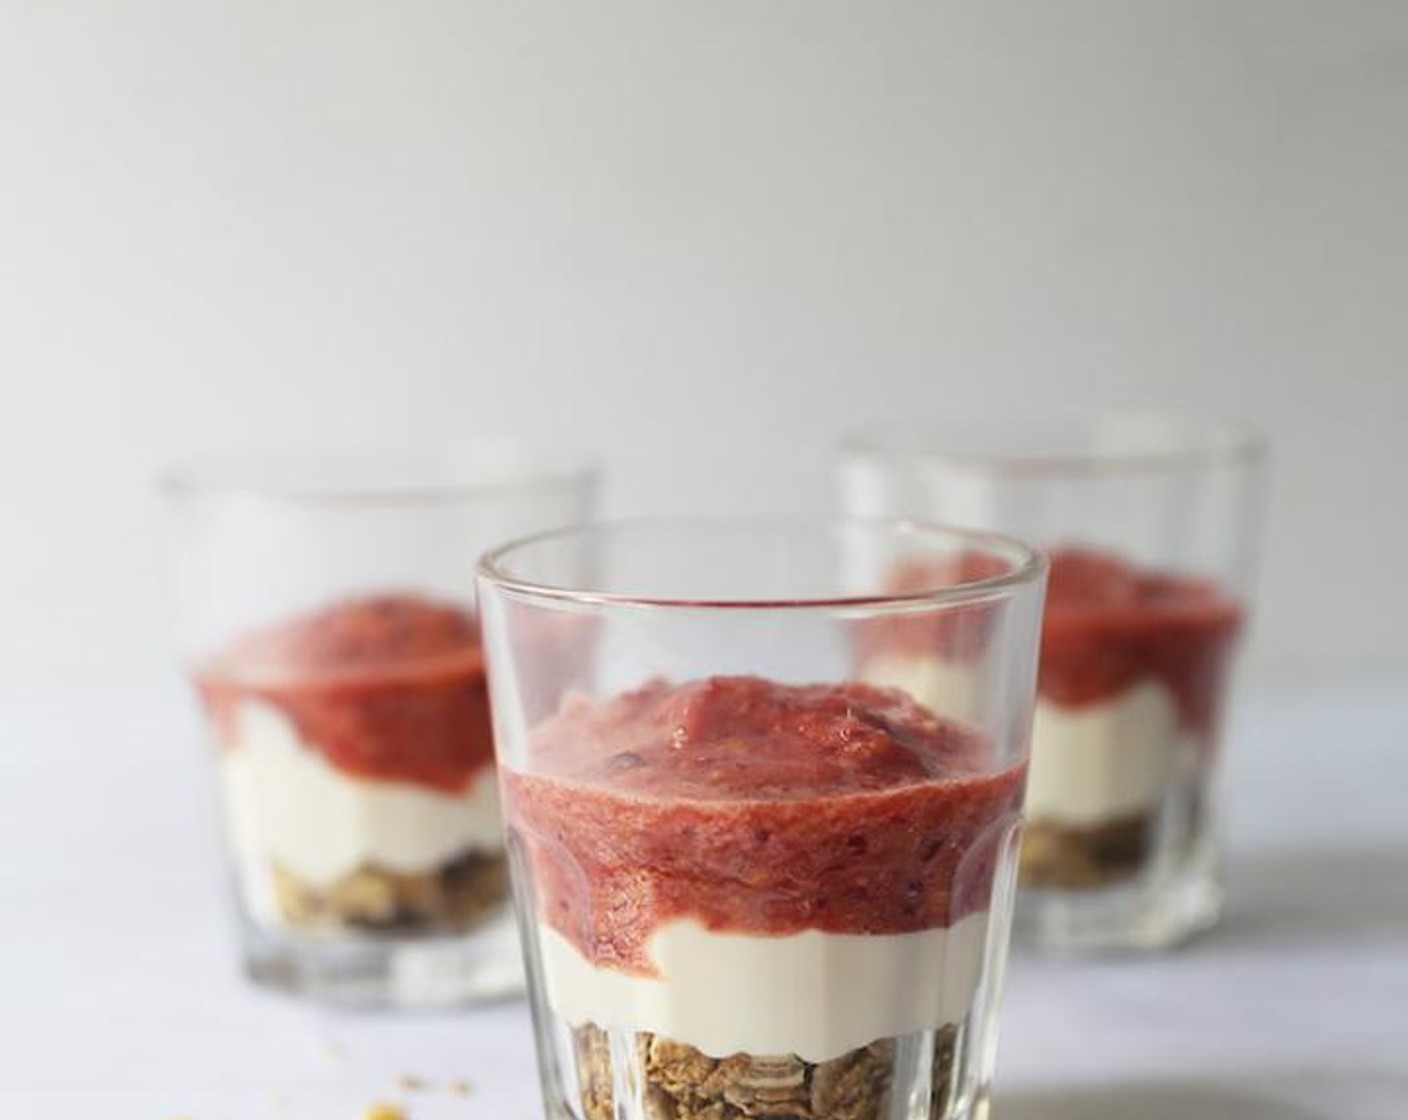 step 2 Divide the Granola (1 cup),Greek Yogurt (to taste) and smoothie in alternating layers in glasses